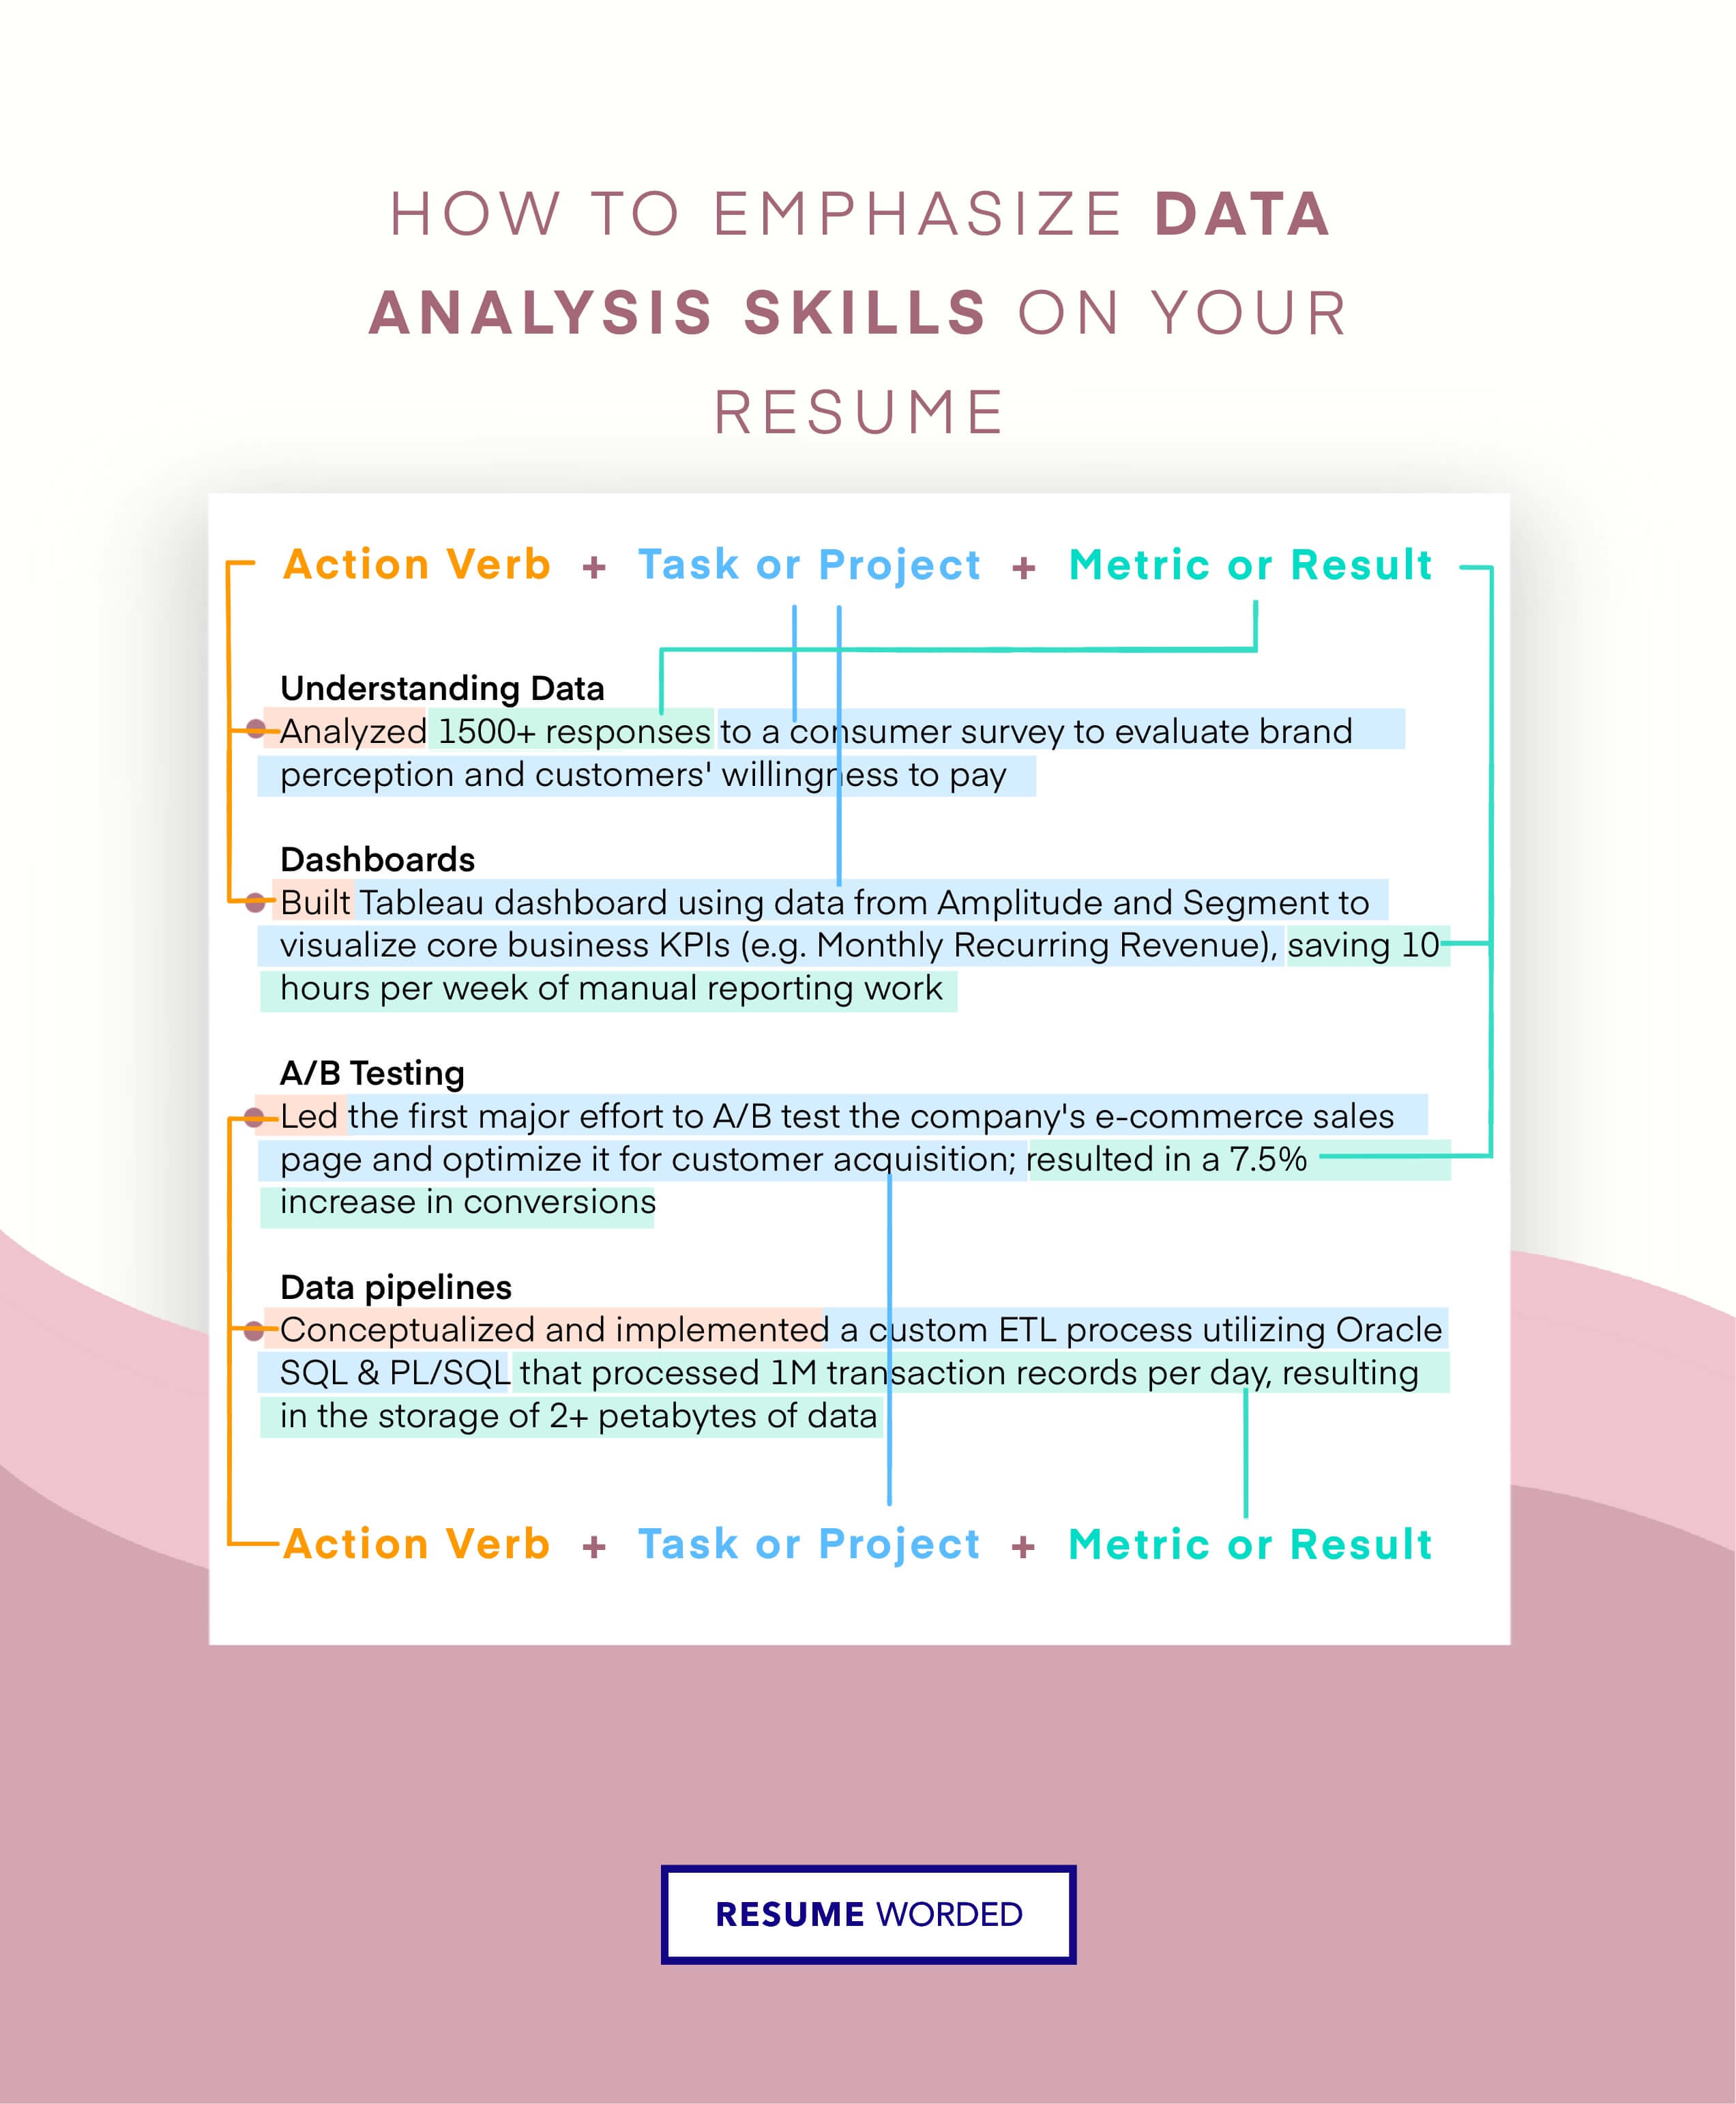 Demonstrate your data analysis skills - Chemistry Research Student CV